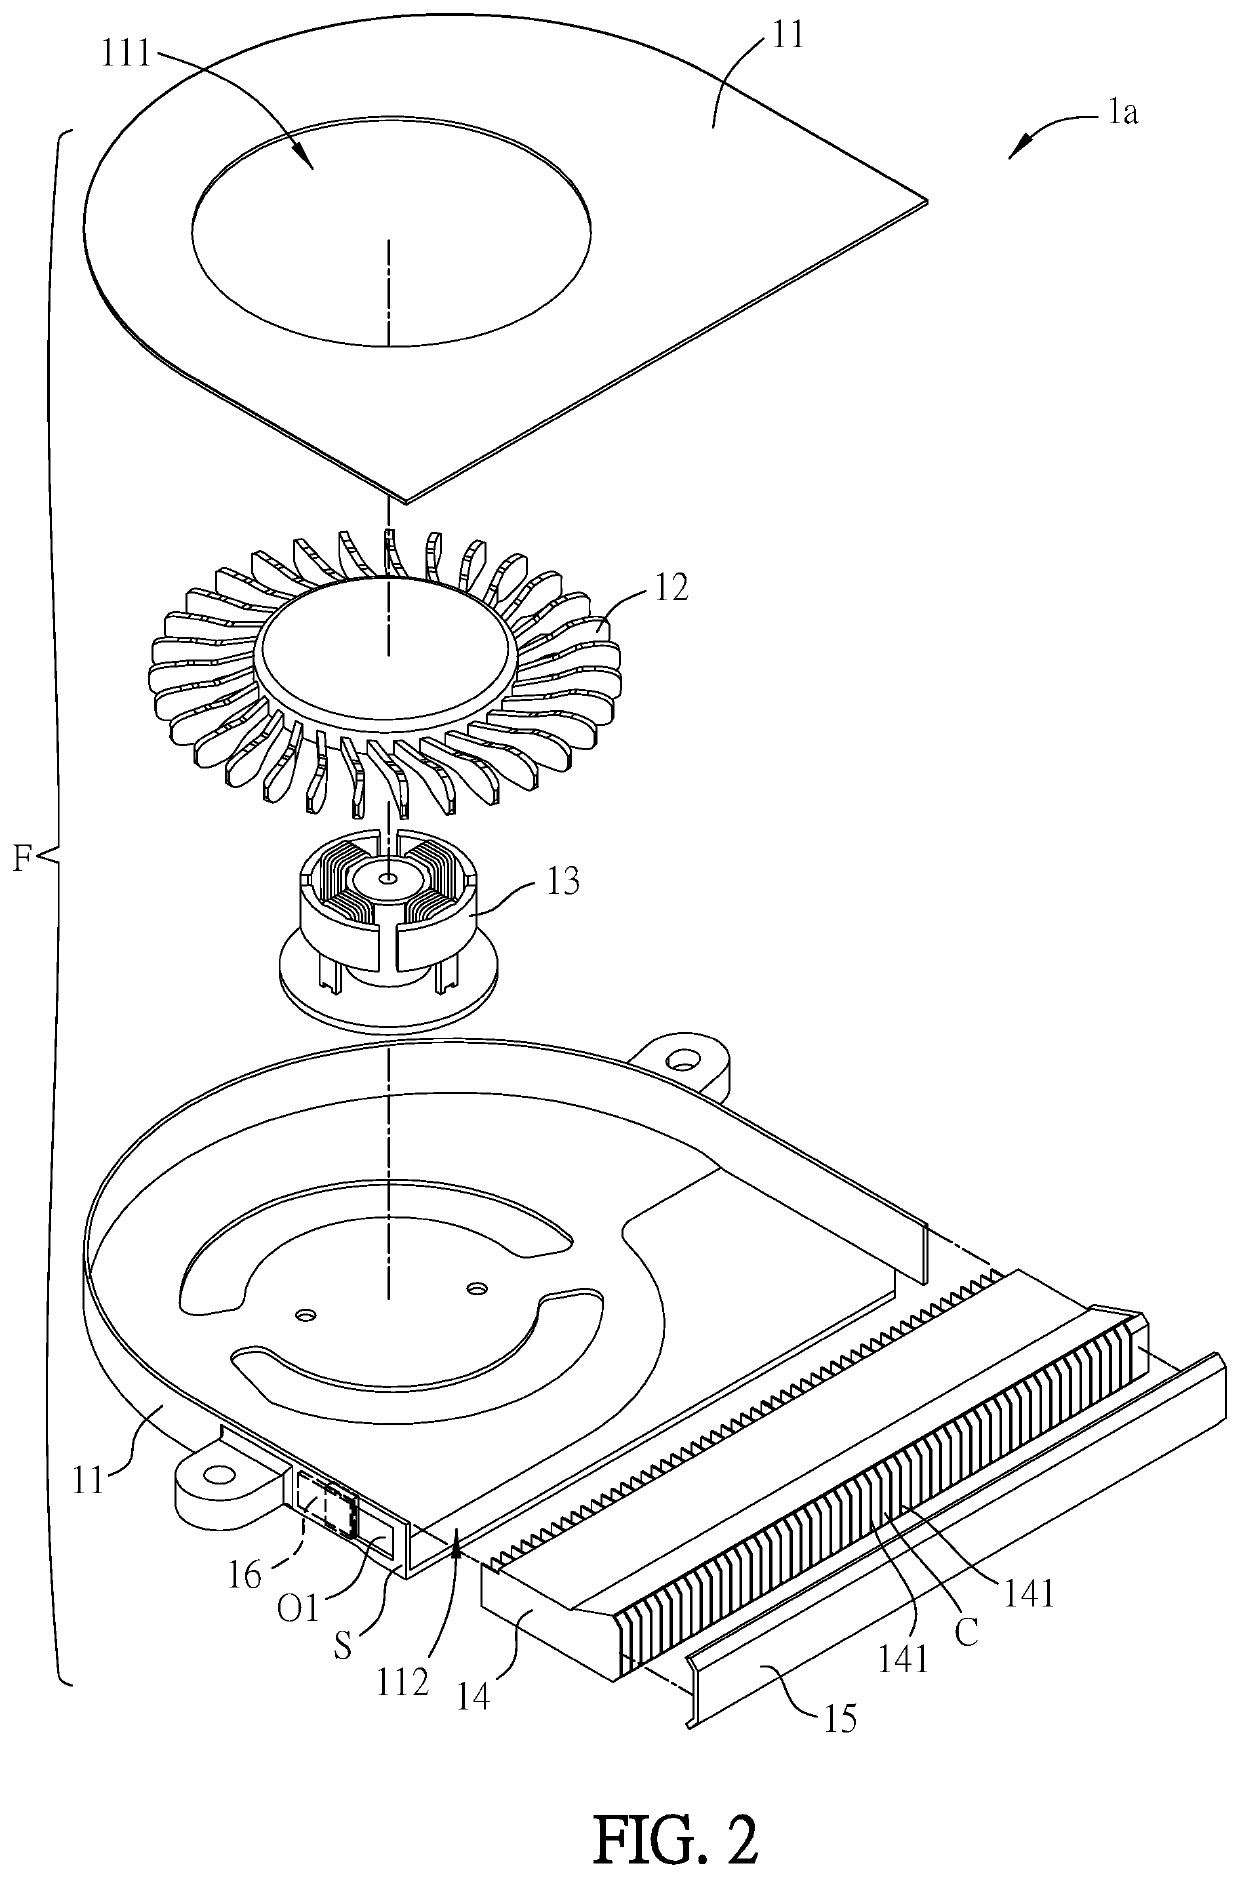 Heat dissipating fin assembly